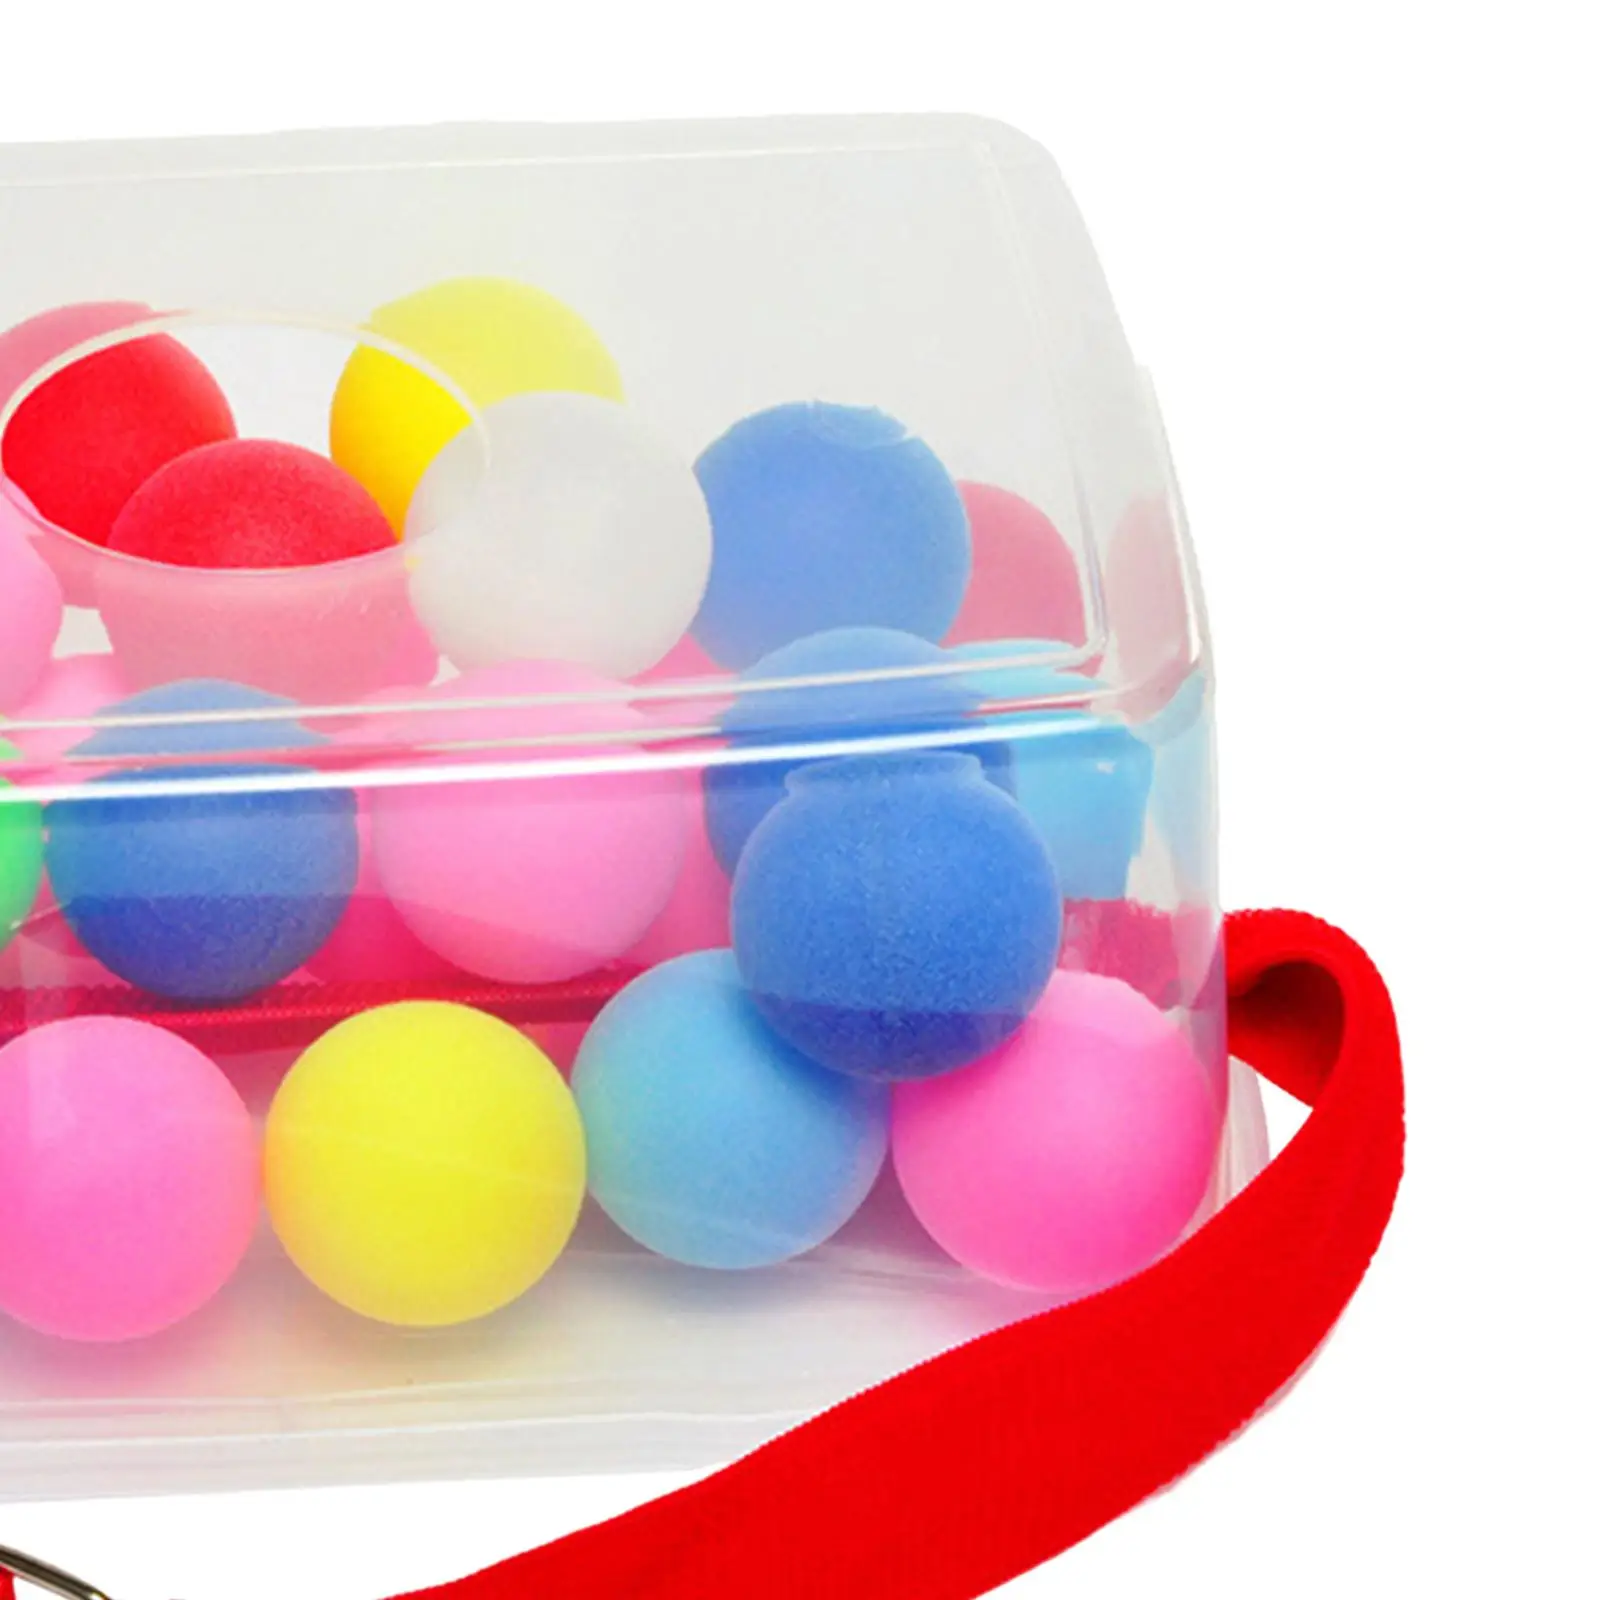 Fun Shaking Swing Balls Game set Swing Balls Game Birthday Gifts with 30 Ball for Party Game Outdoors Kids Boys and Girls Adults